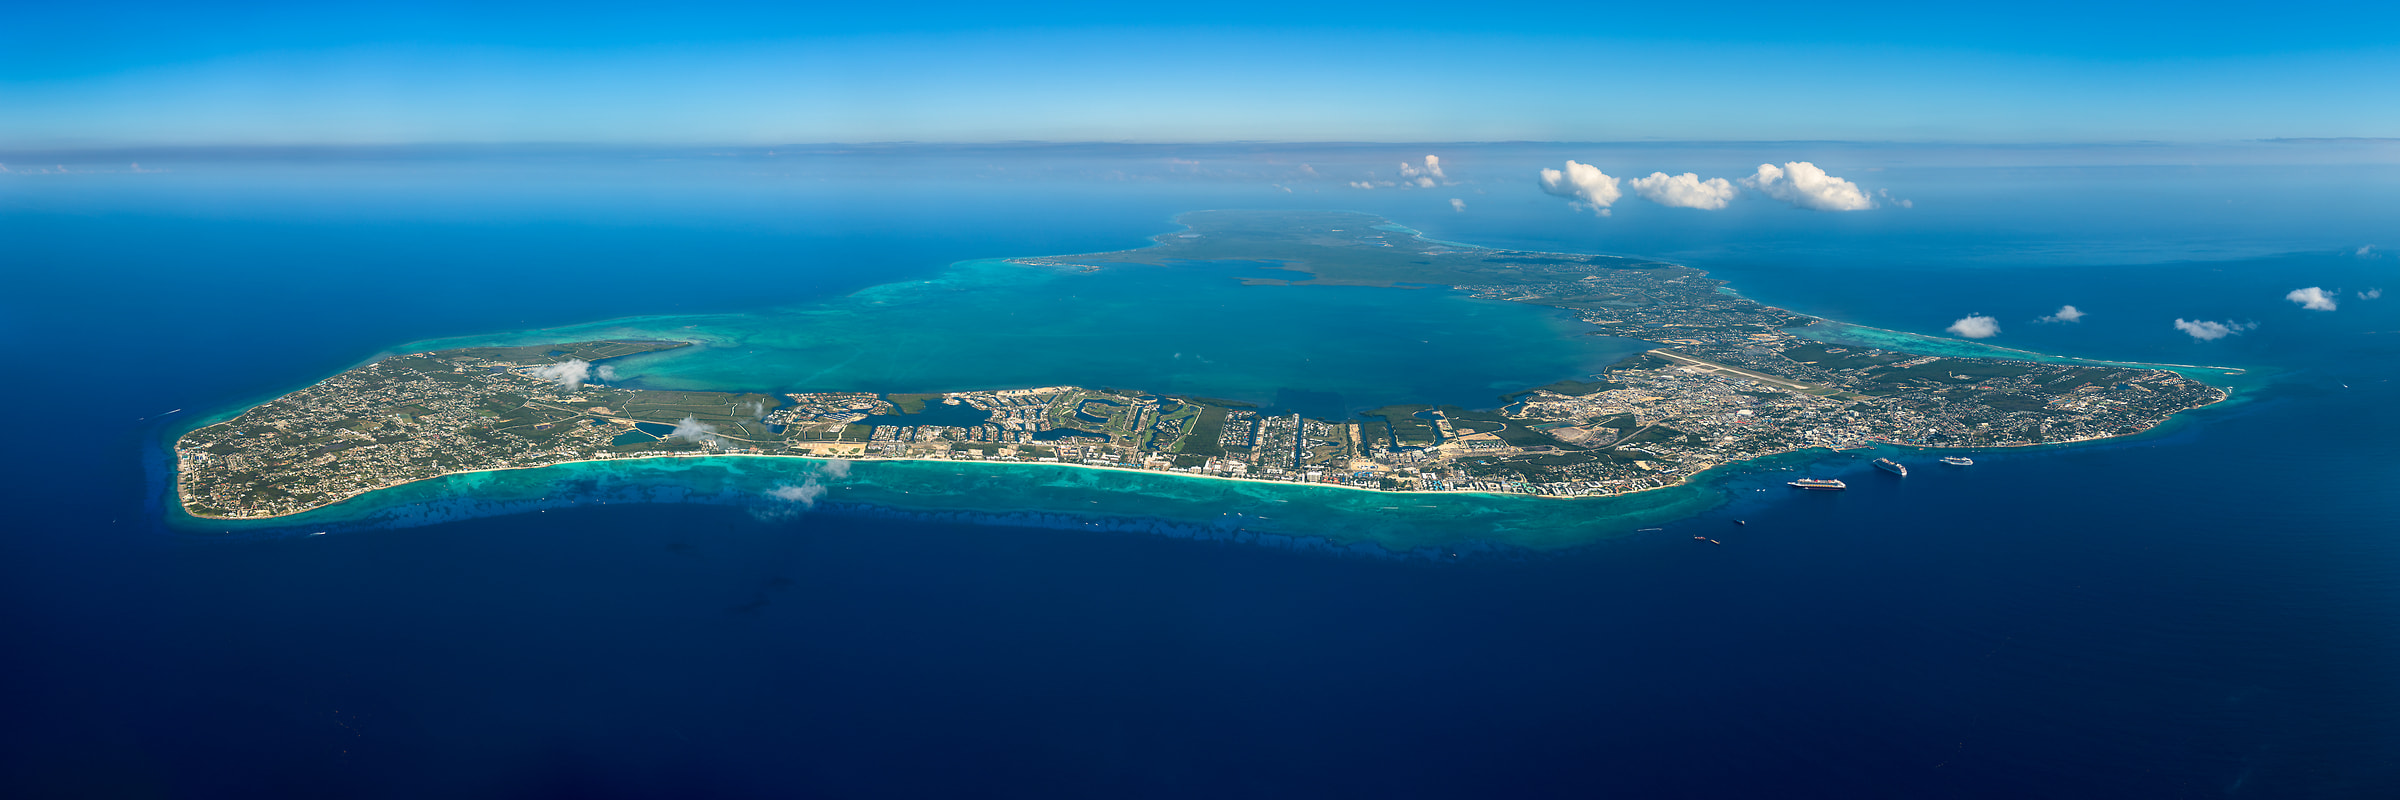 428 megapixels! A very high resolution aerial photo of Seven Mile Beach on Grand Cayman island; VAST photo created by Aaron Priest in the Cayman Islands